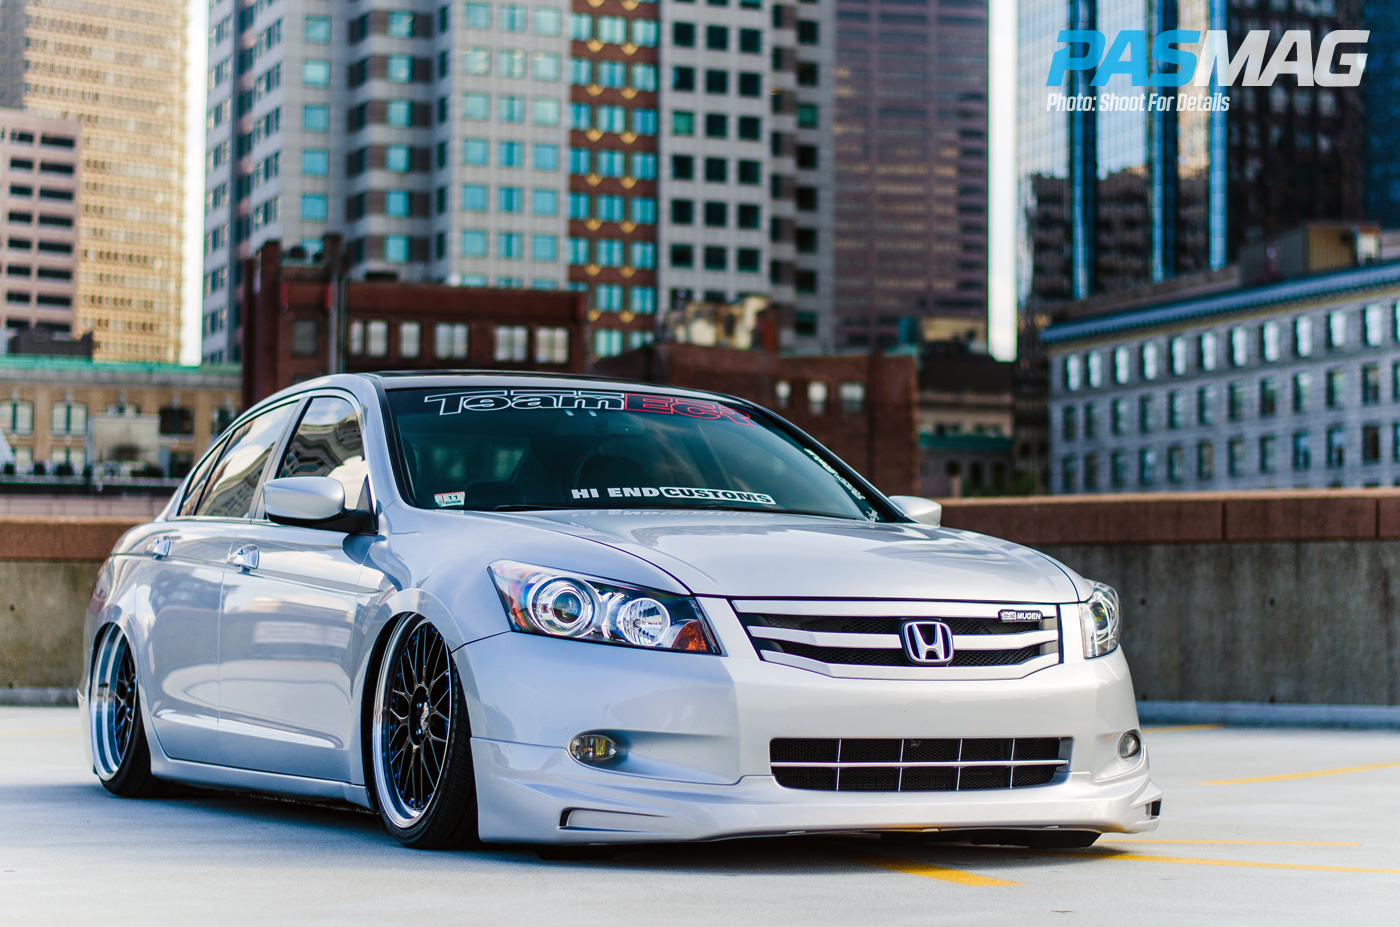 2014 Tuner Battlegrounds #TBGLIVE Winner @ Tuner Evolution: Peter Giuffre, 2010 Honda Accord EX-L (Photo by Shoot For Details)